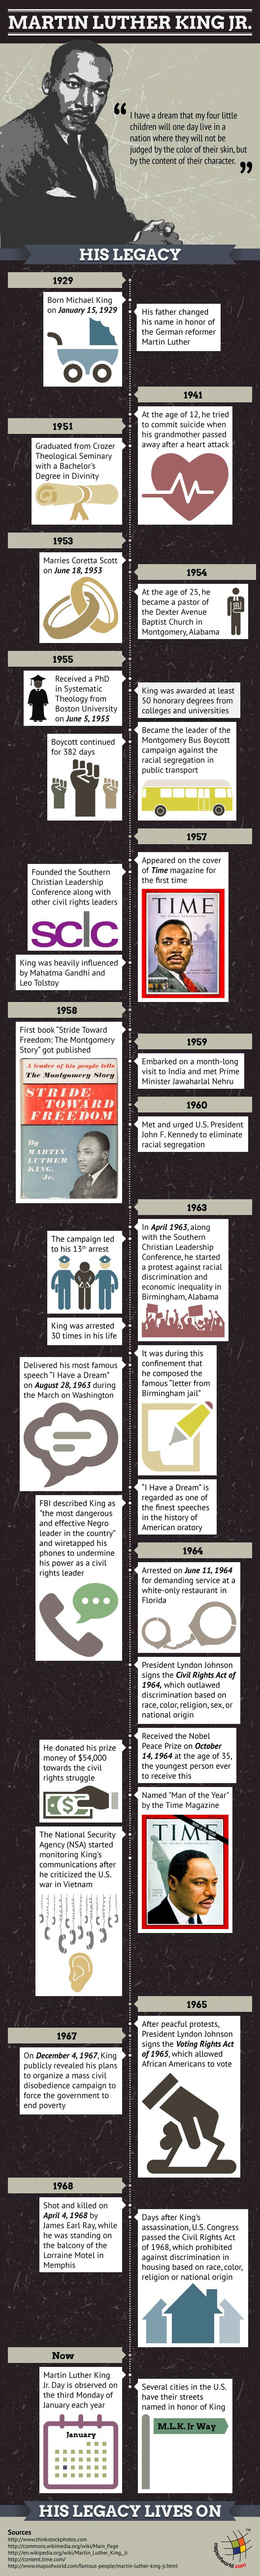 Infographic of Martin Luther King Jr